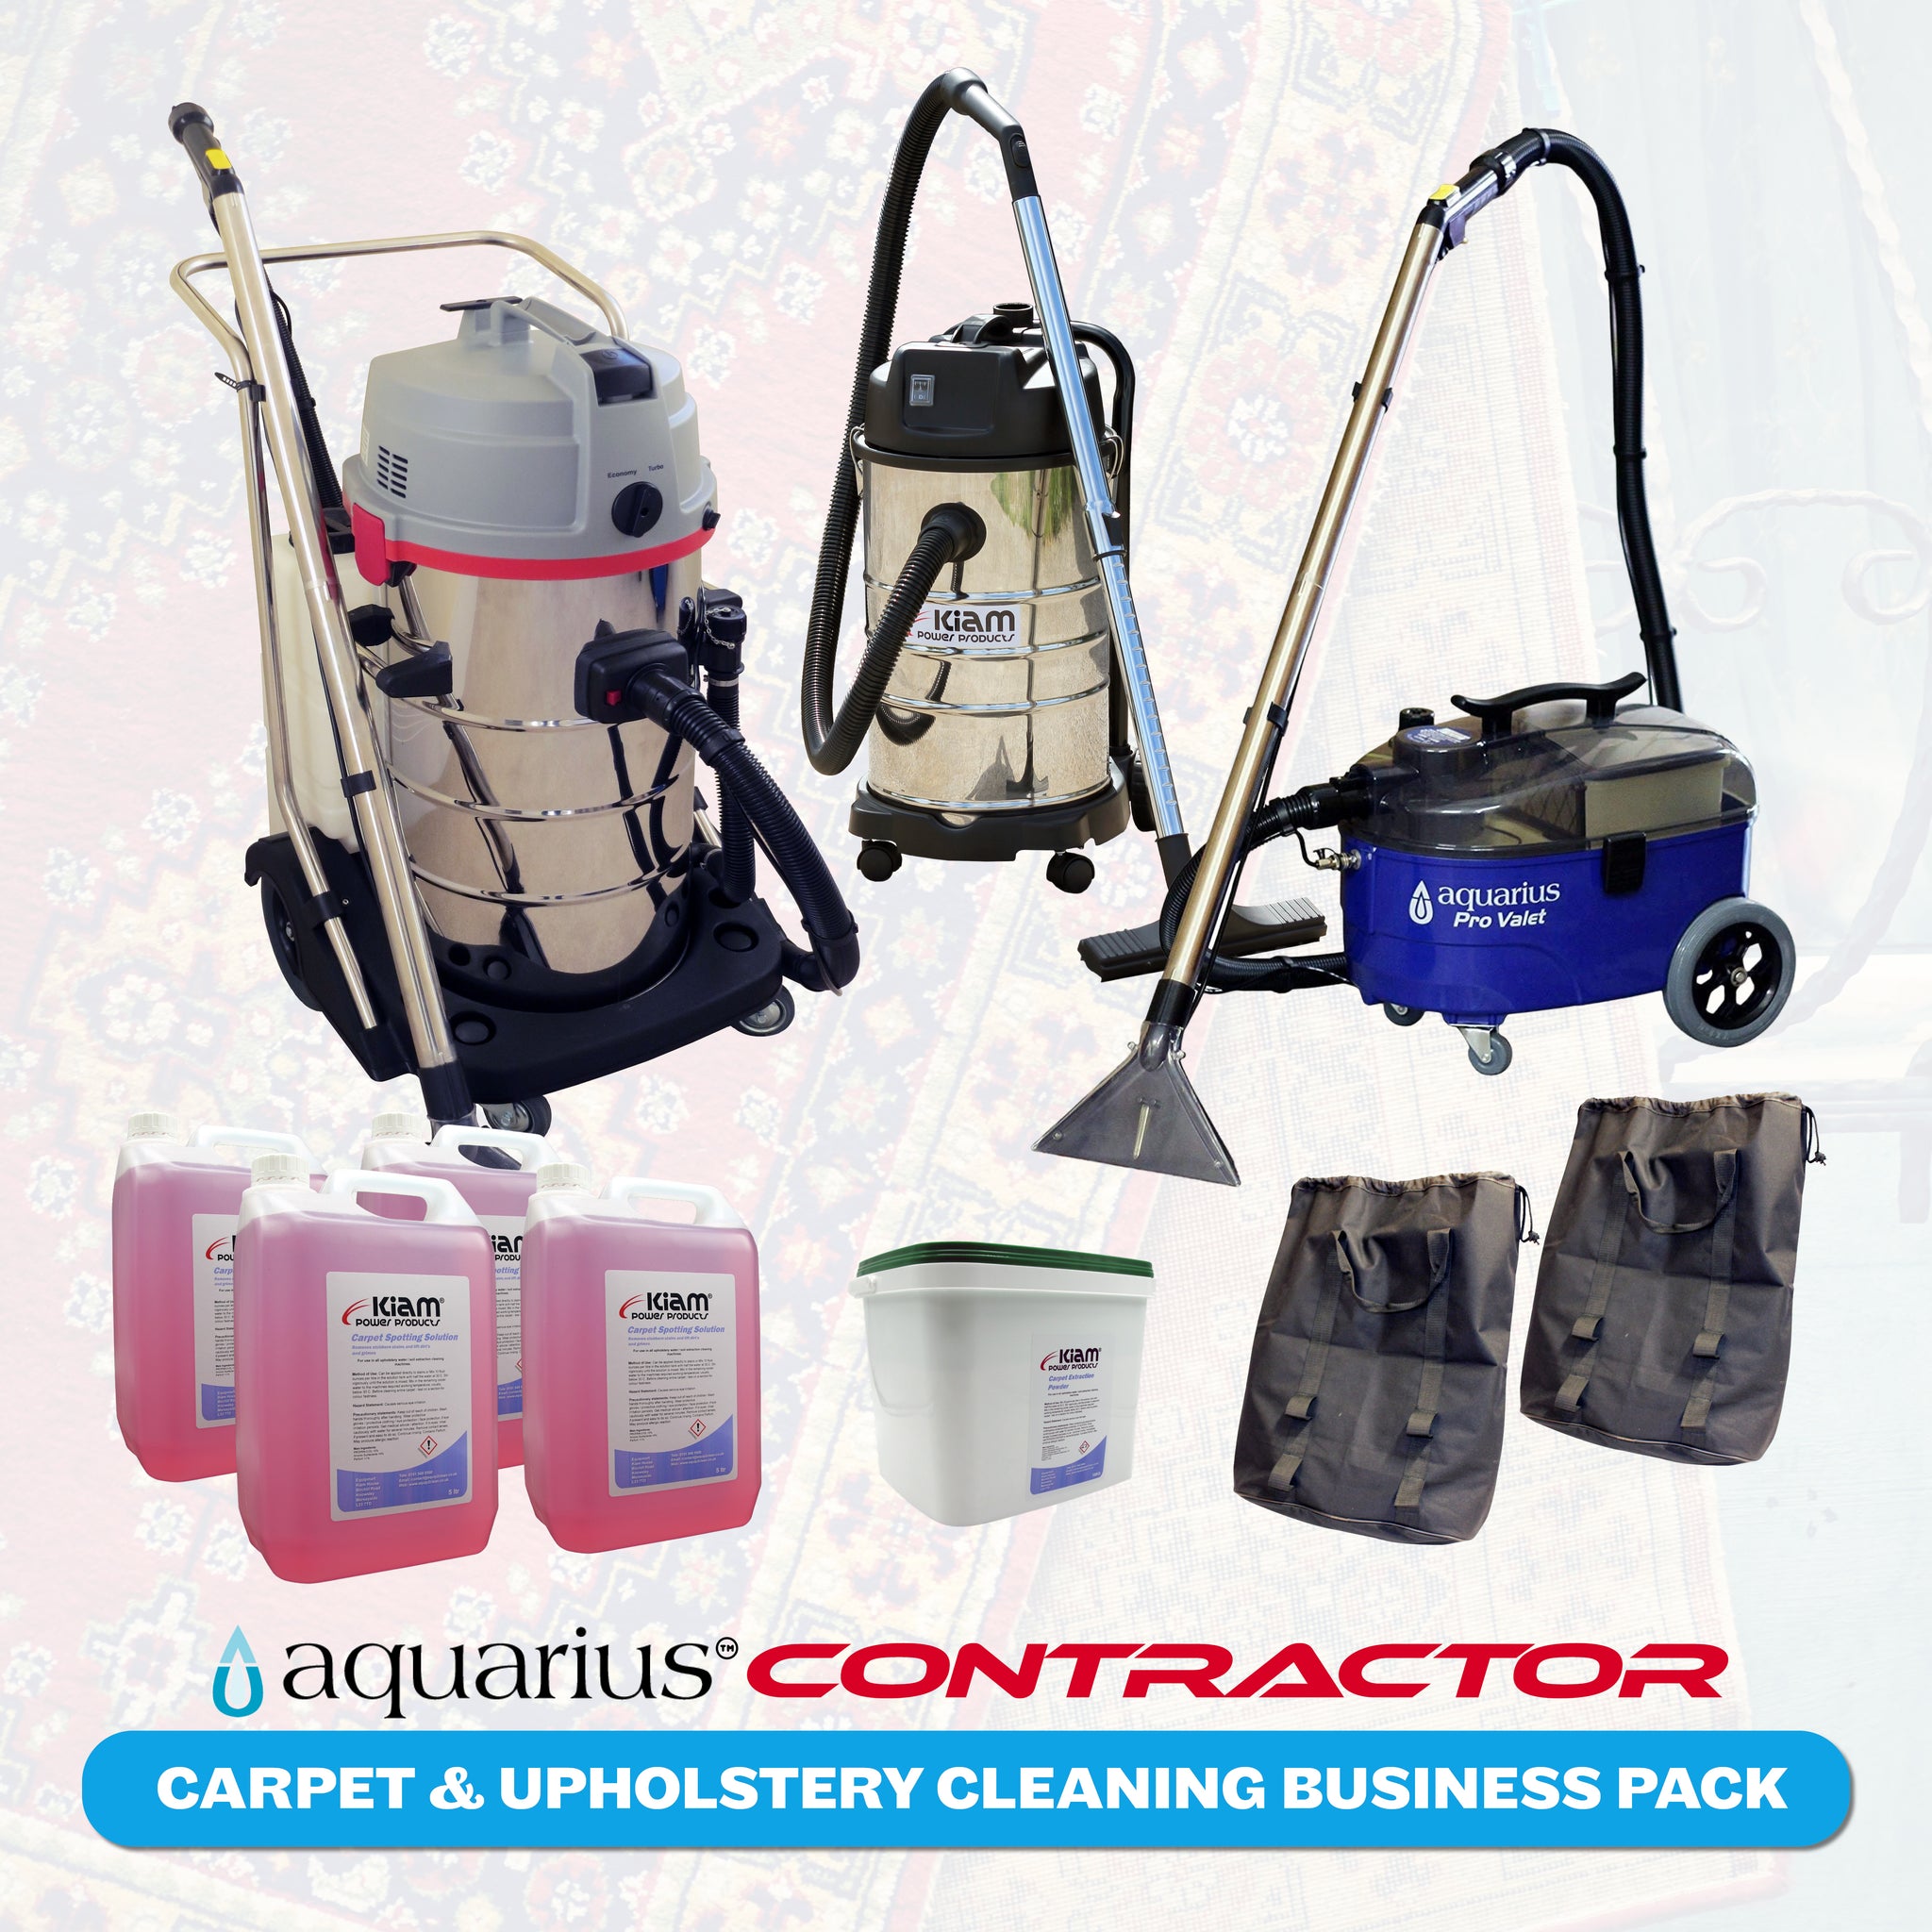 CAR INTERIOR CARPET & UPHOLSTERY PRO VALET CLEANING EQUIPMENT MACHINE  PACKAGE